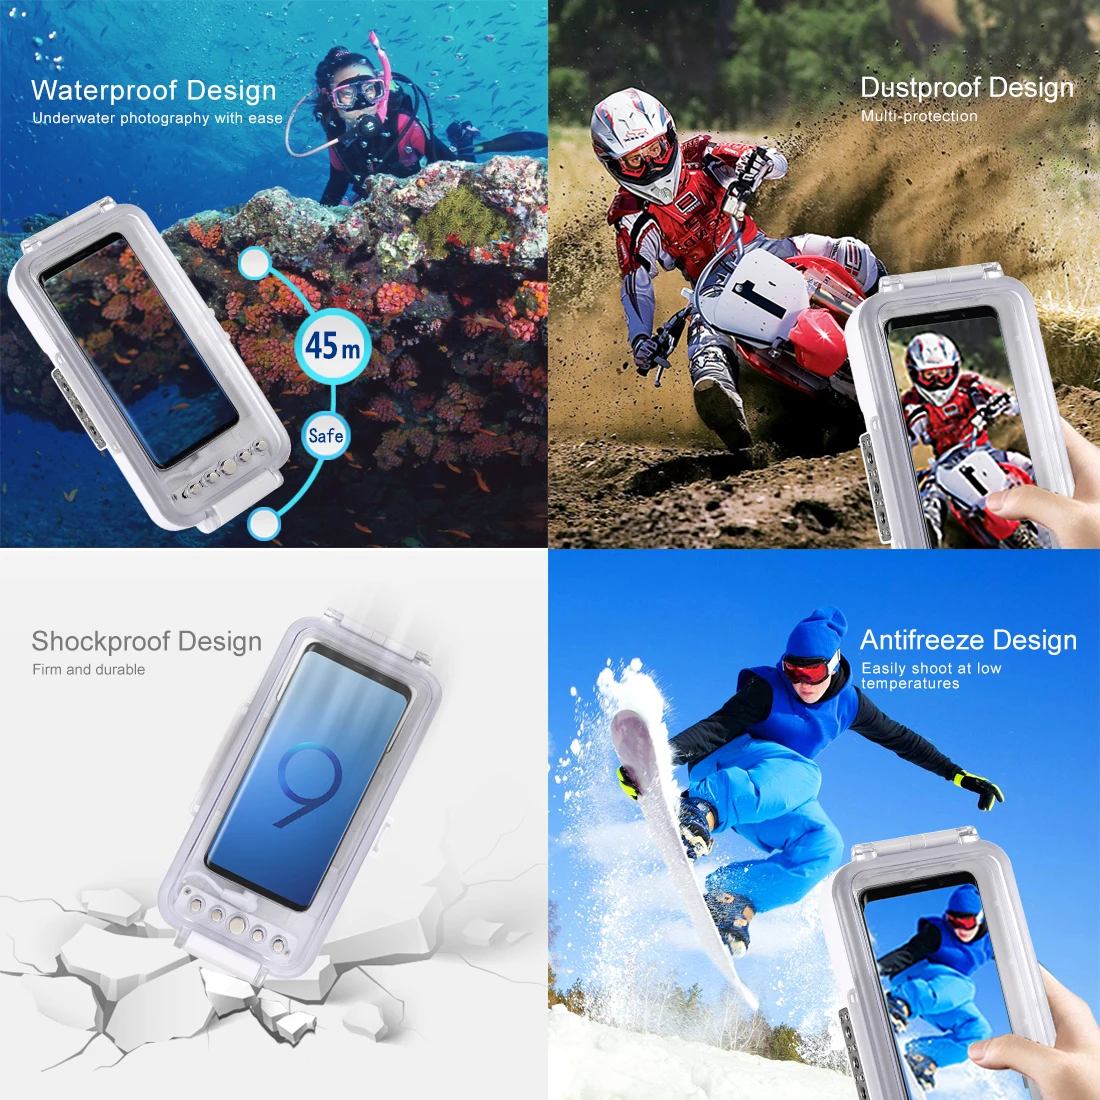 PULUZ 45m/147ft Waterproof Diving Housing Photo Video Taking Underwater Cover for Android Type-C OTG Mobile Phone Diving Case